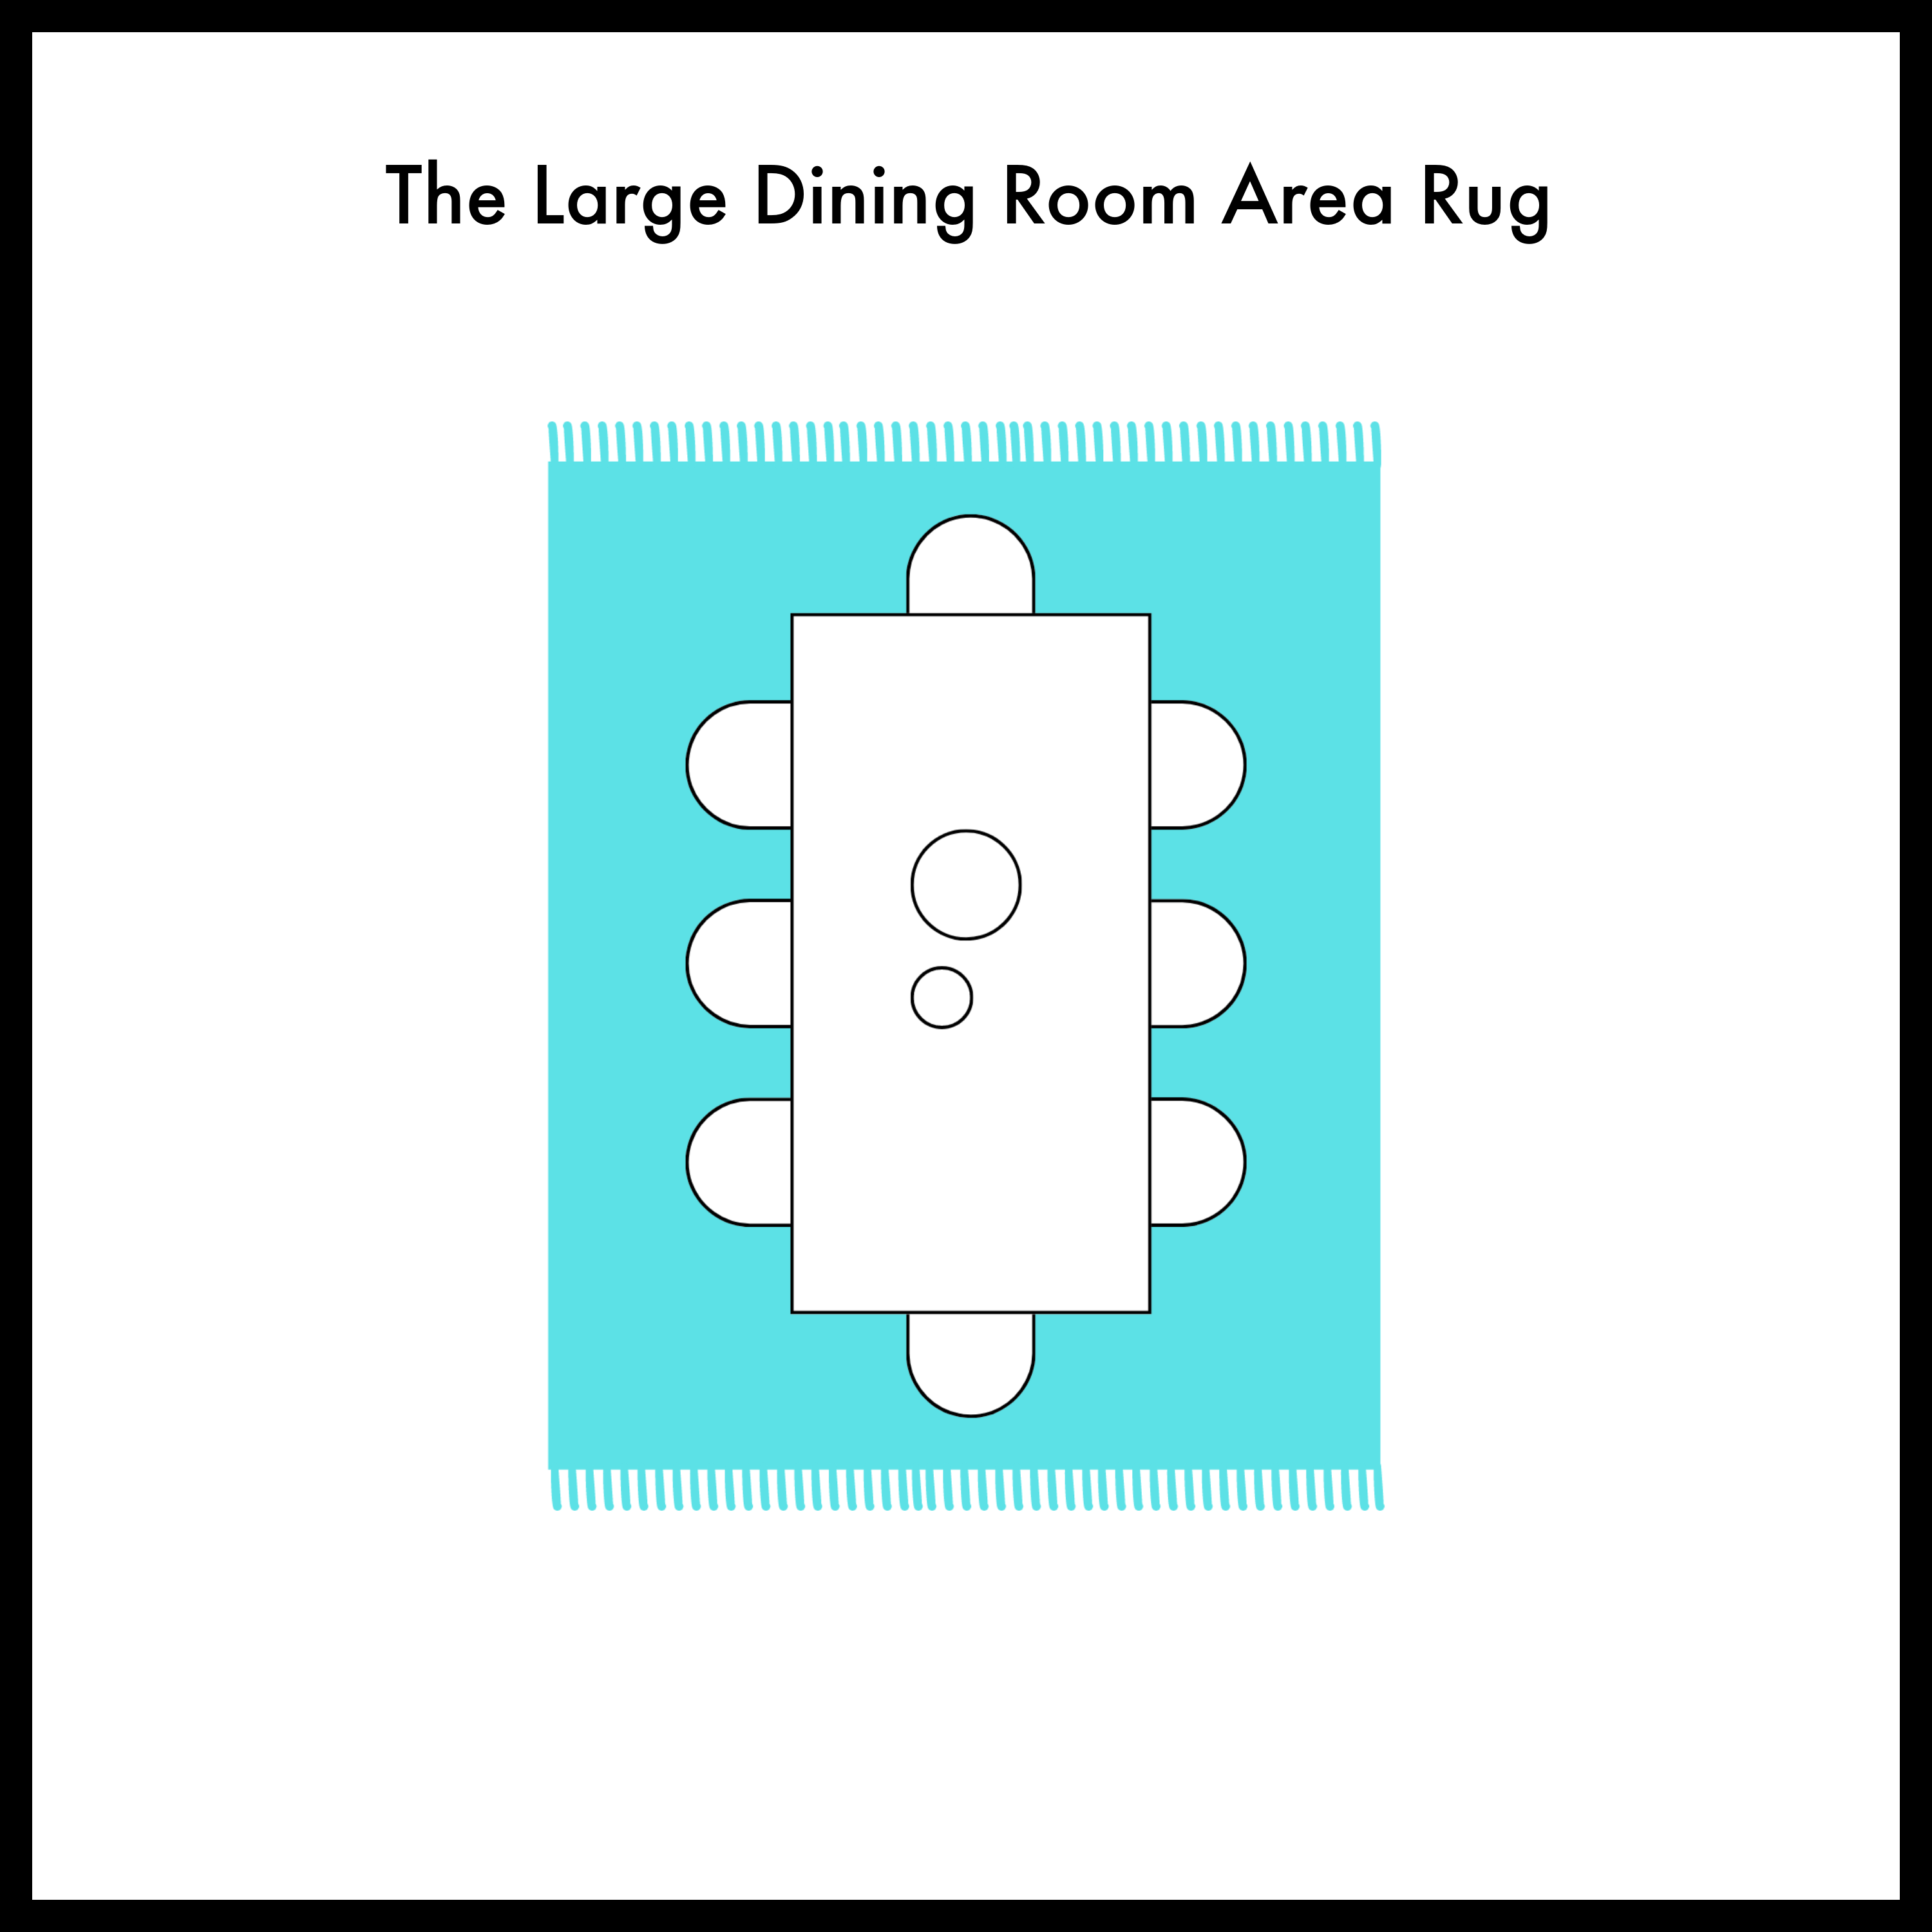 The Larger Dining Room Area Rug